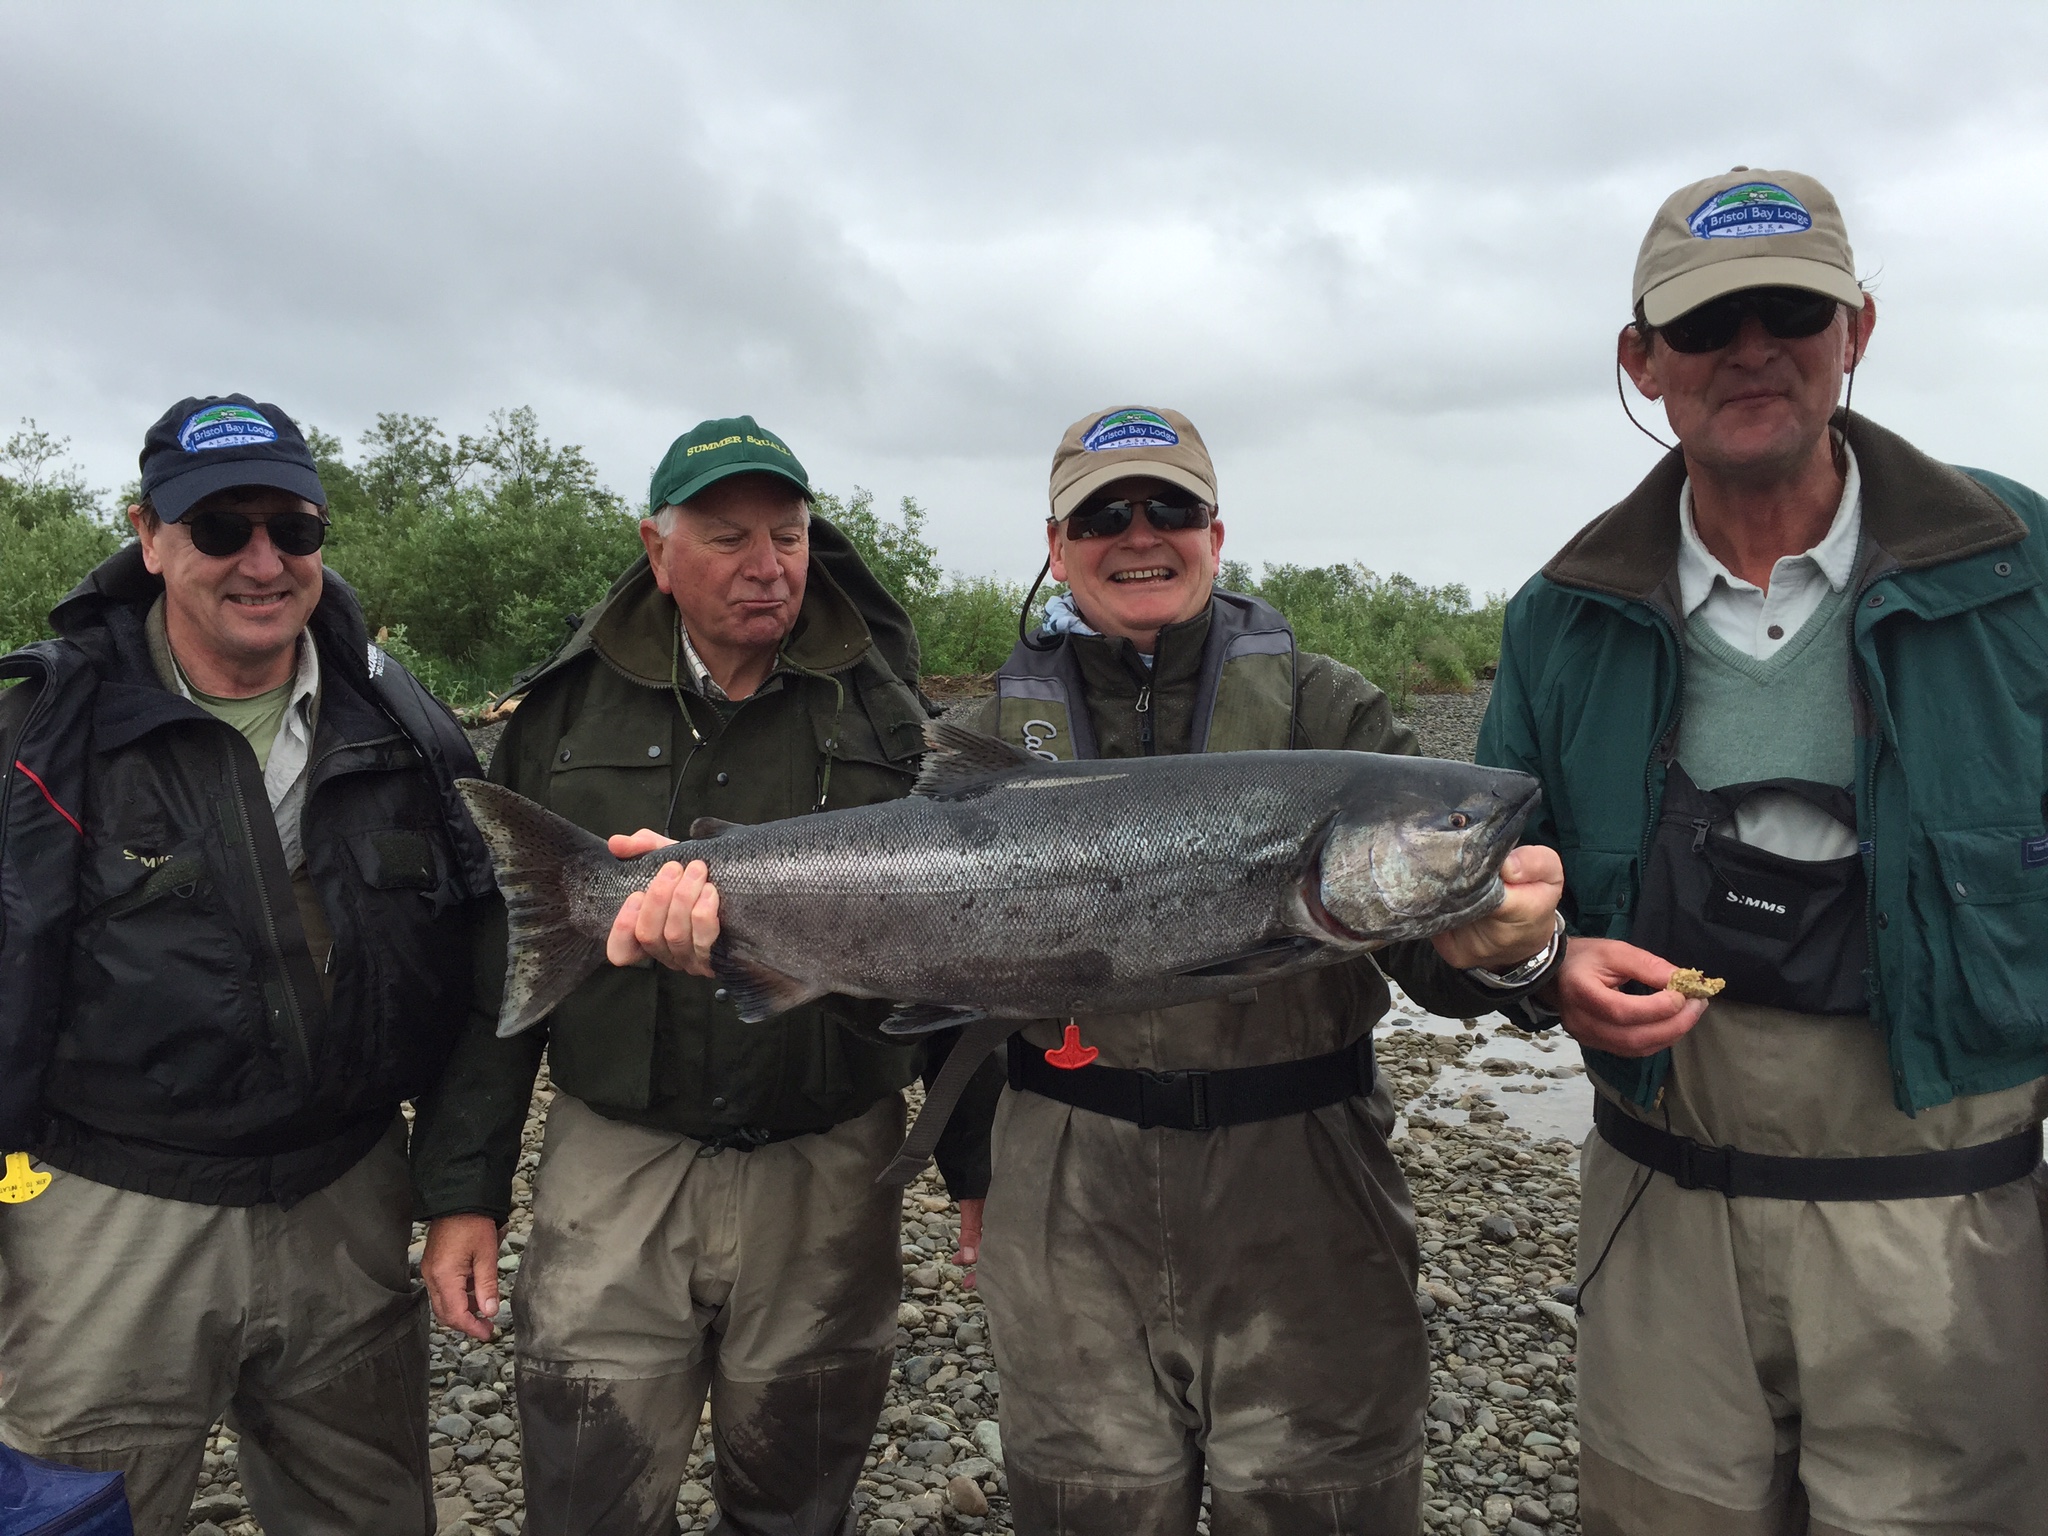 King Salmon caught on the fly